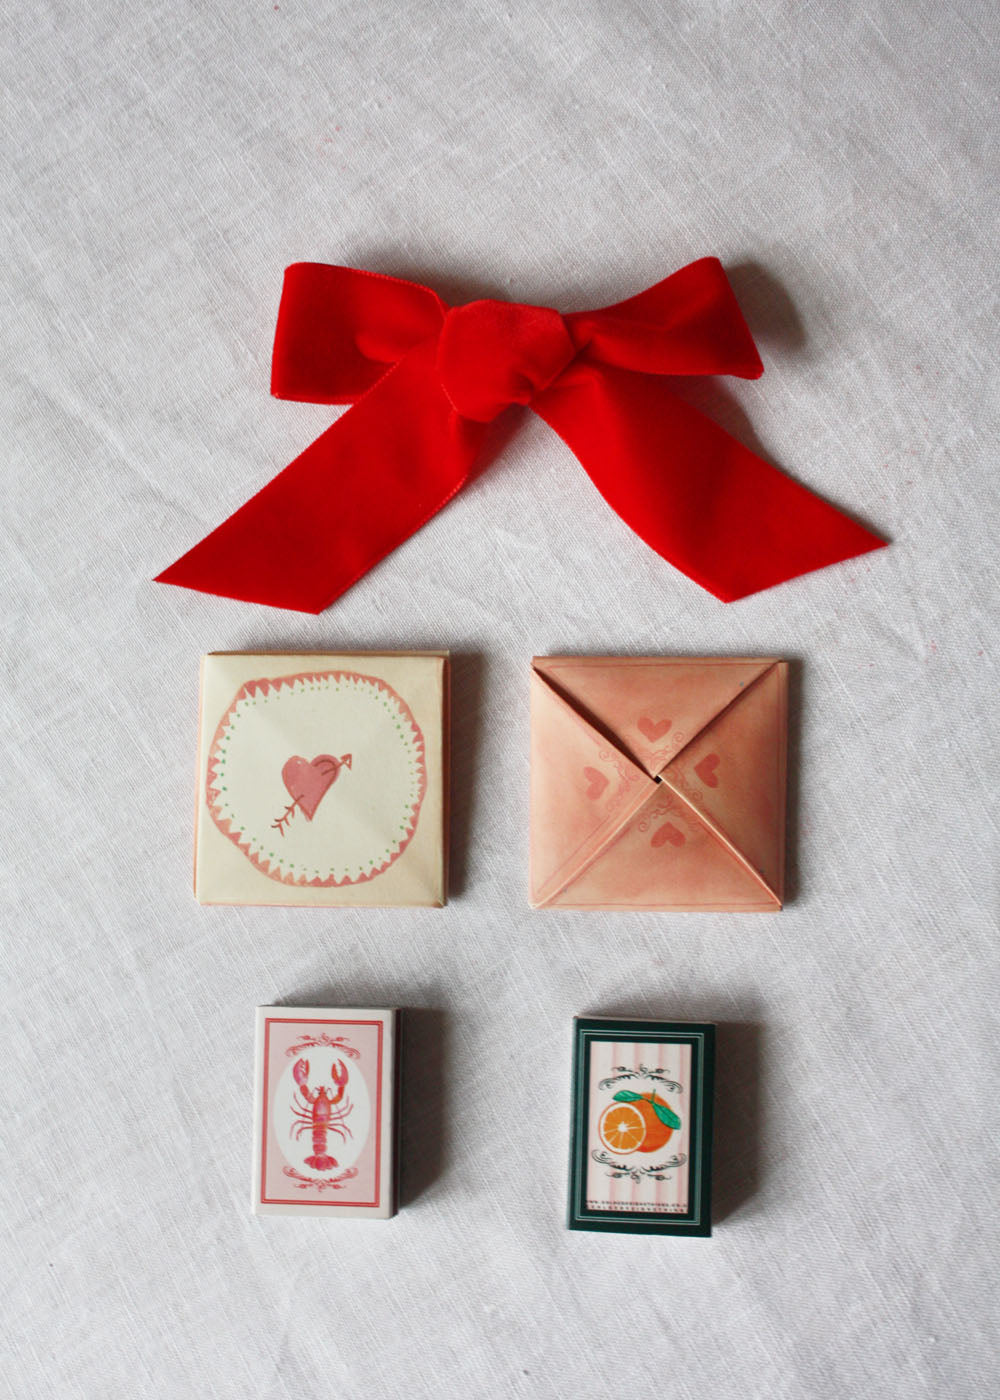 Cocolulu x Chloe Designs Things Lobster candle and match box set